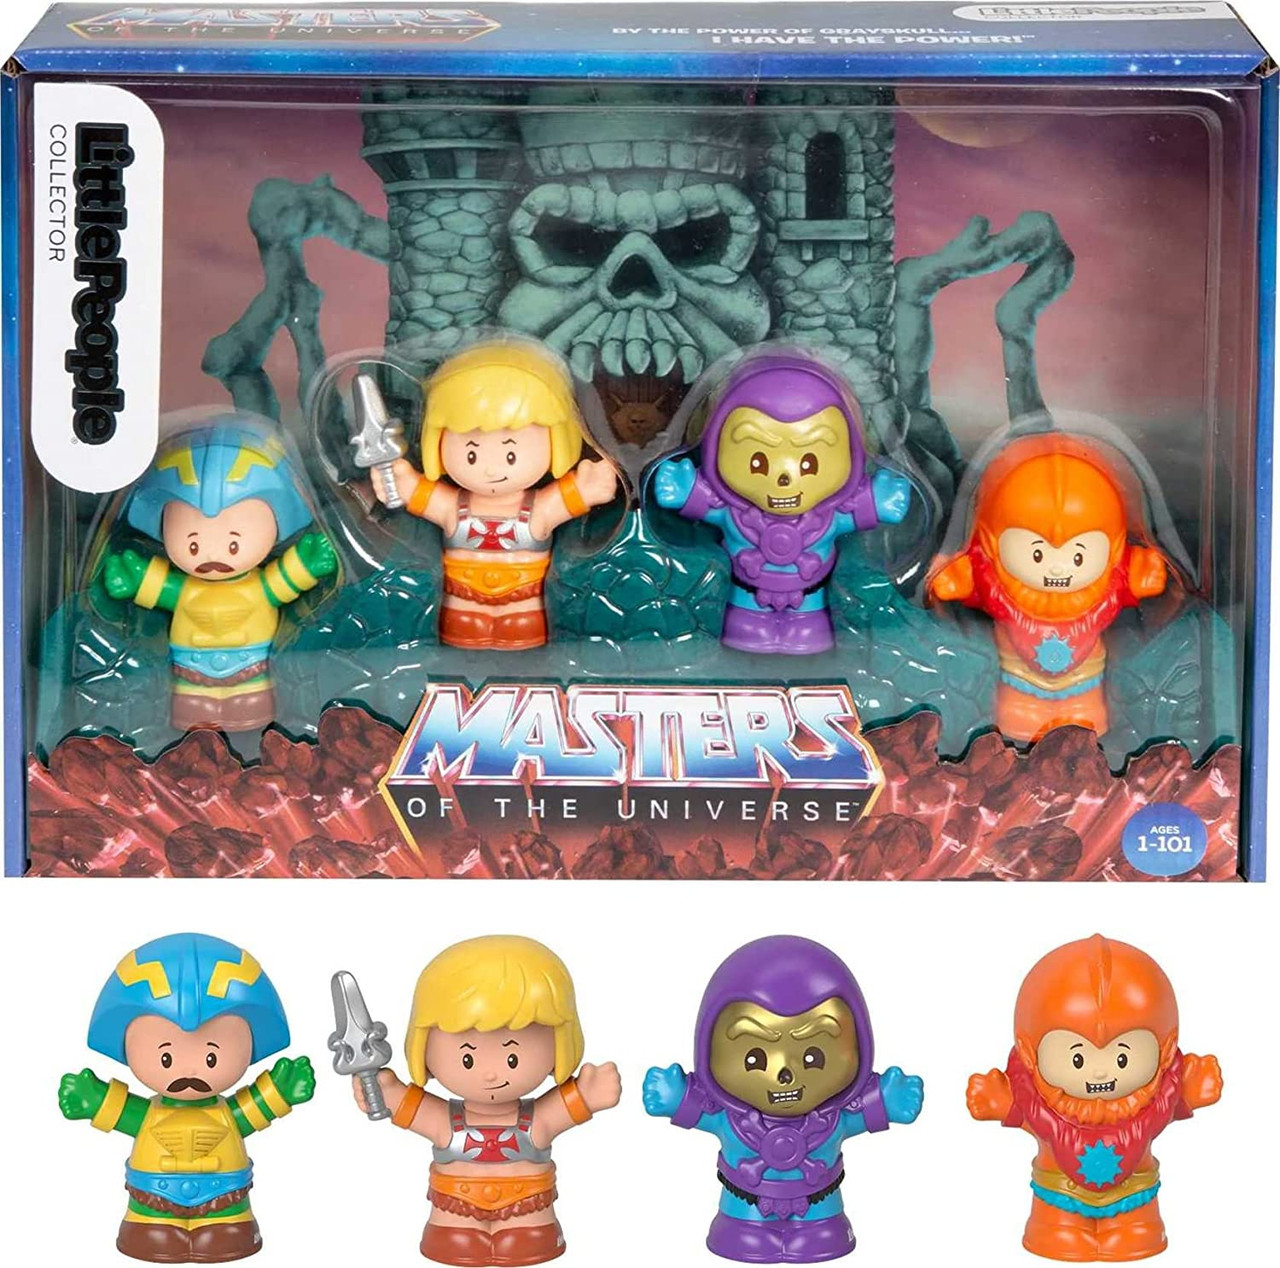 https://cdn11.bigcommerce.com/s-7jueb3py/images/stencil/1280x1280/products/5394/31571/Fisher_Price_Little_People_Collector_Masters_Of_The_Universe_Four_Figure_Set__02925.1670901038.jpg?c=2